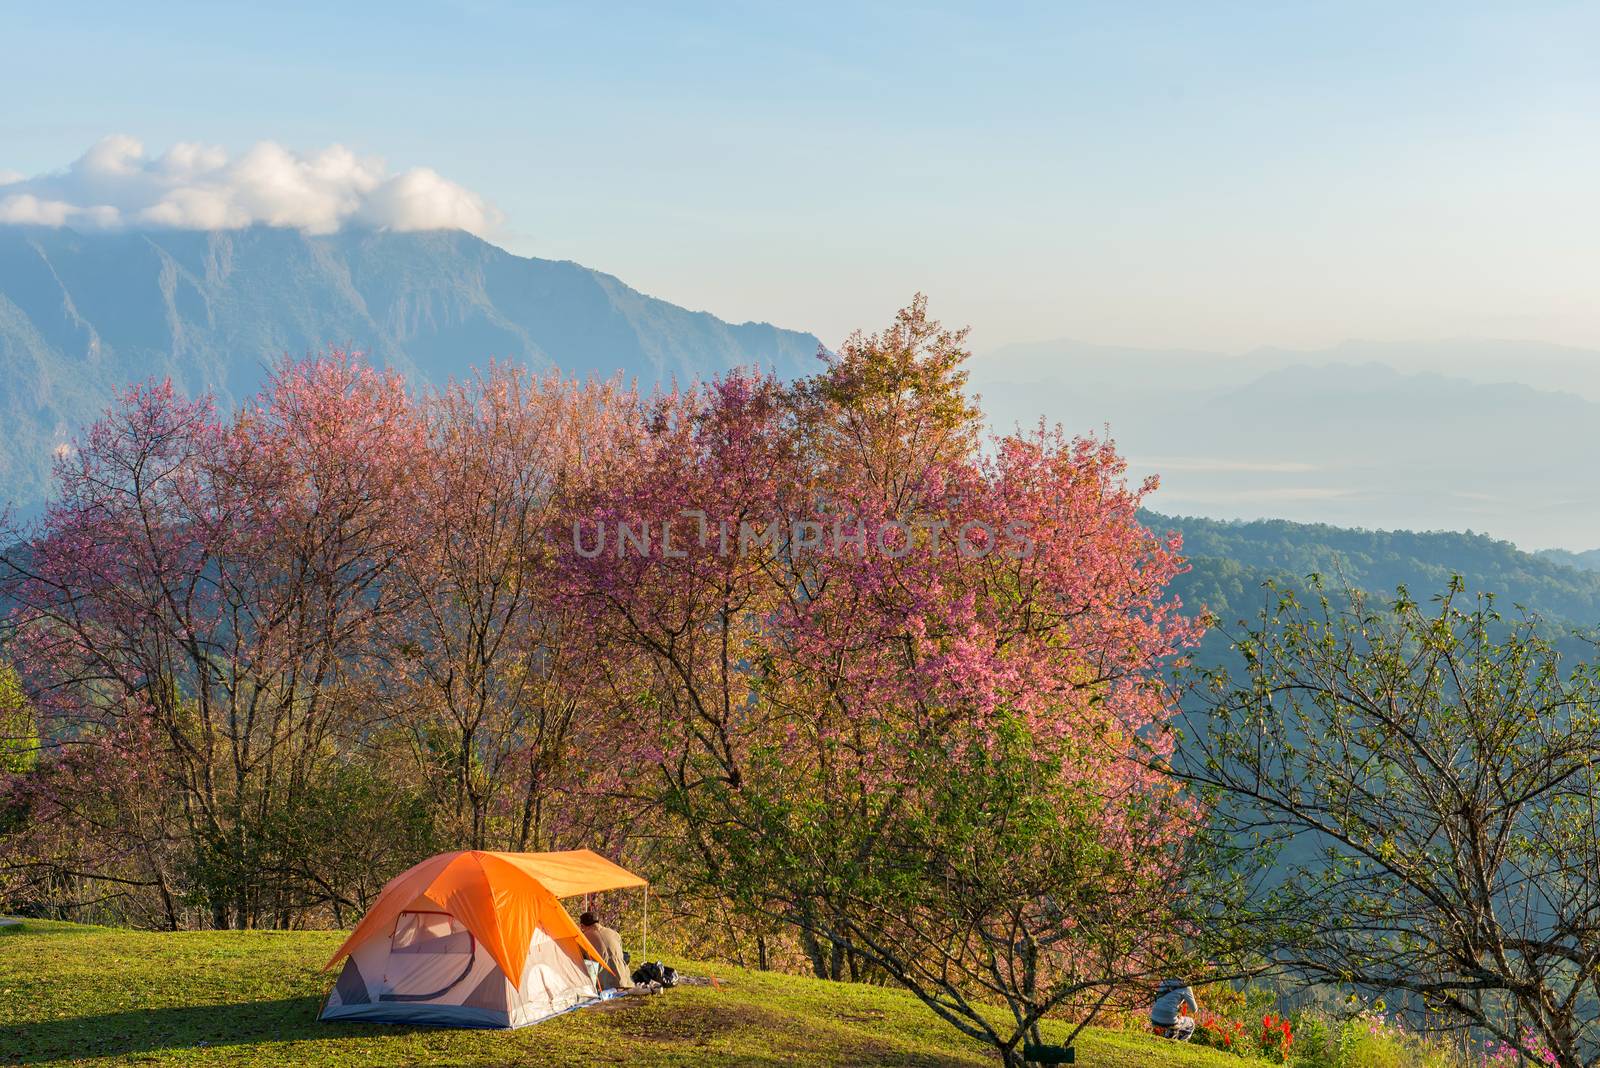 Camping tent in campground on top of mountain with sunrise at Doi Luang Chiang Dao, ChiangMai Thailand.